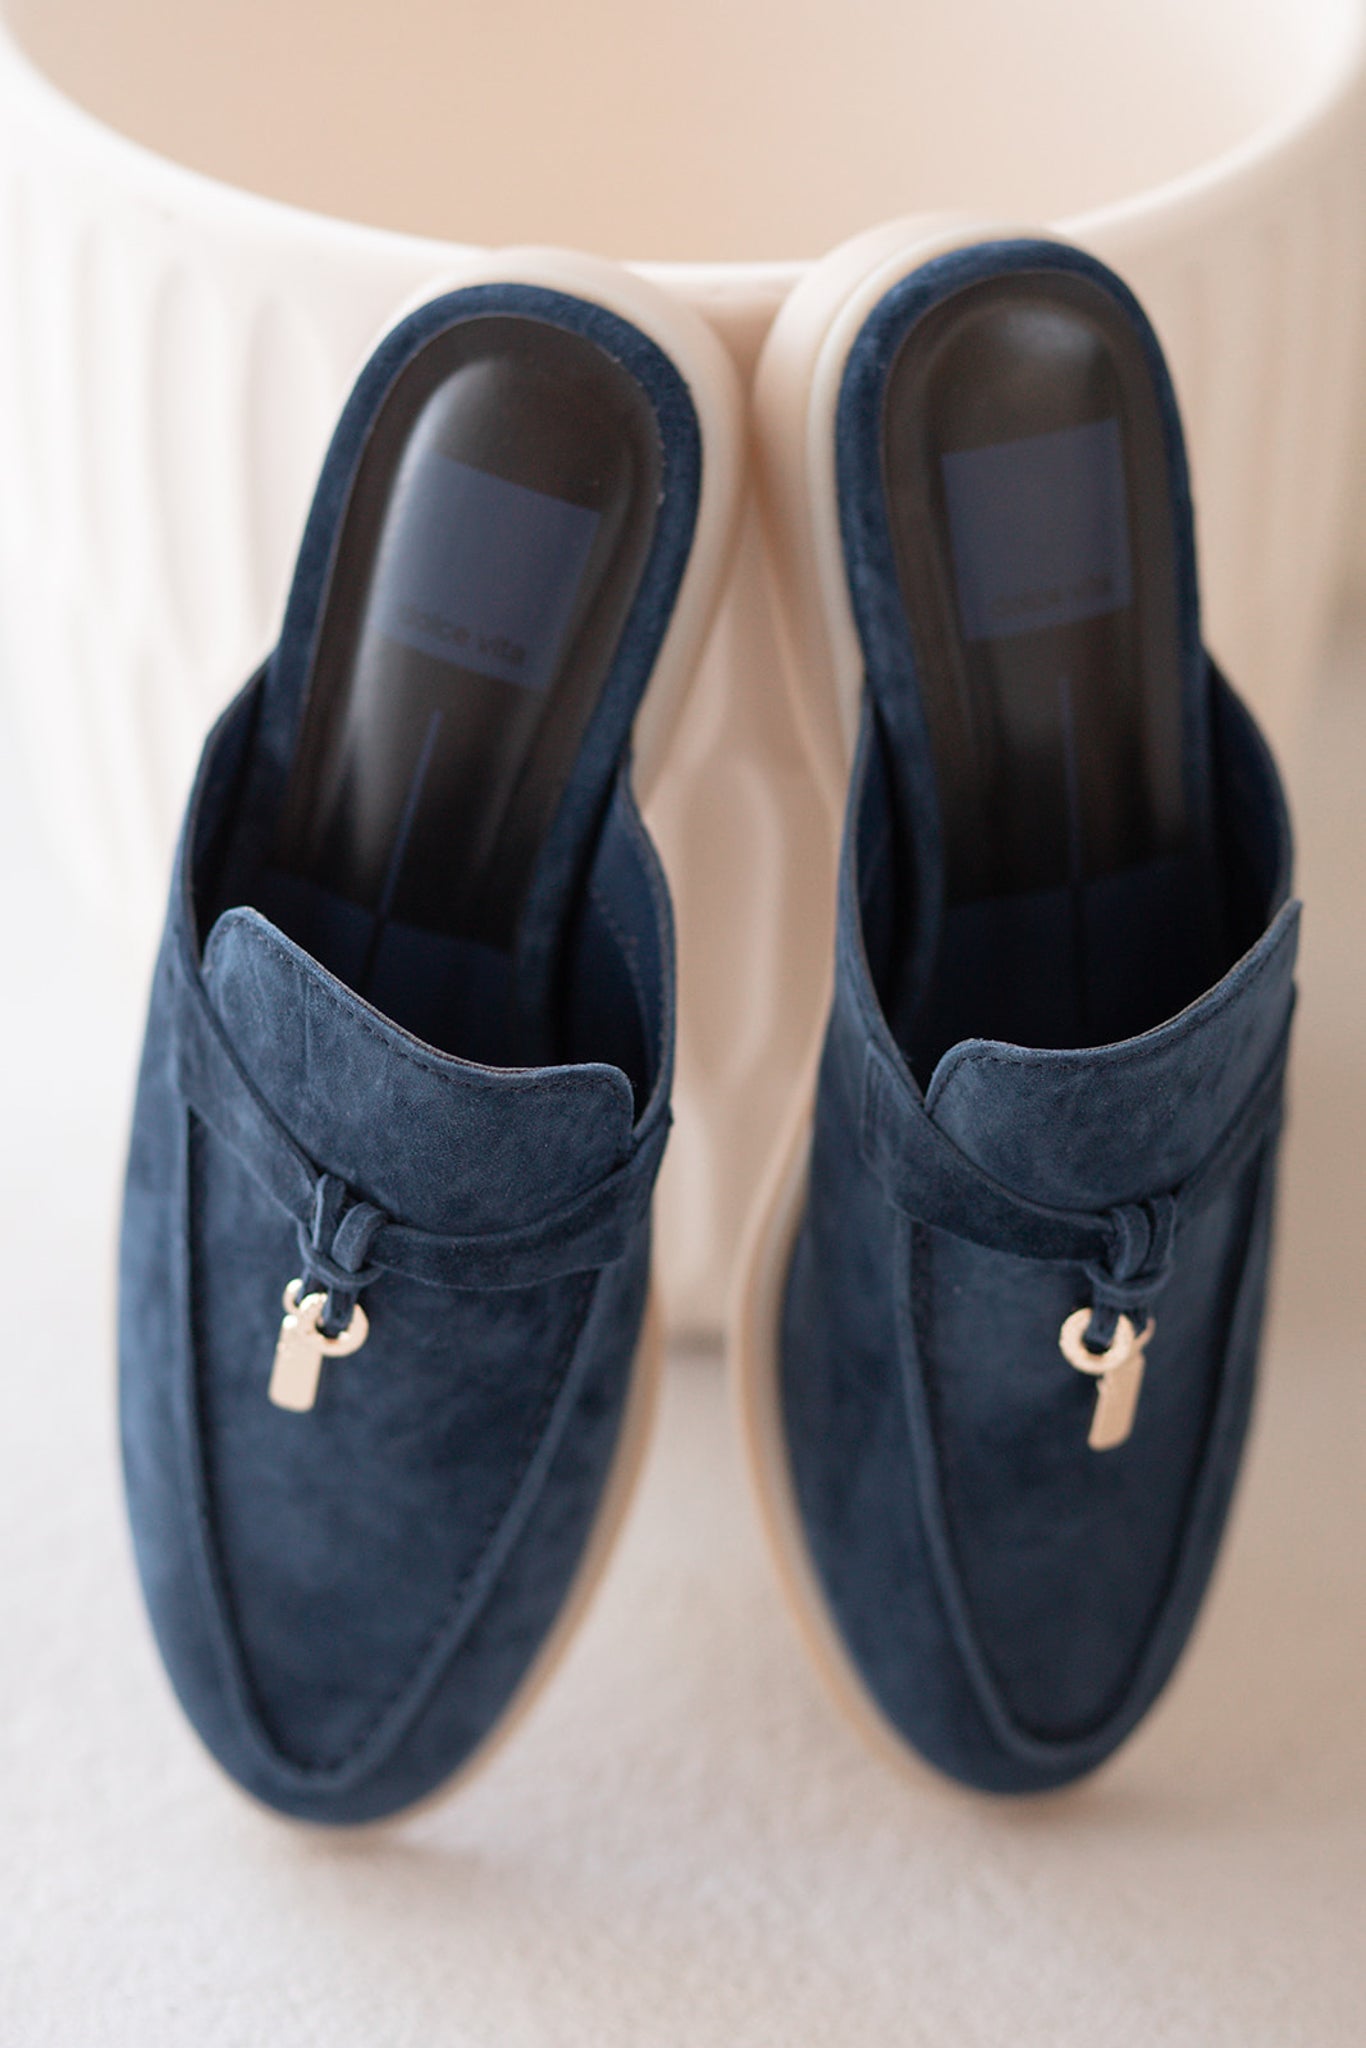 Dolce Vita Lasail Flats in Navy Blue Suede